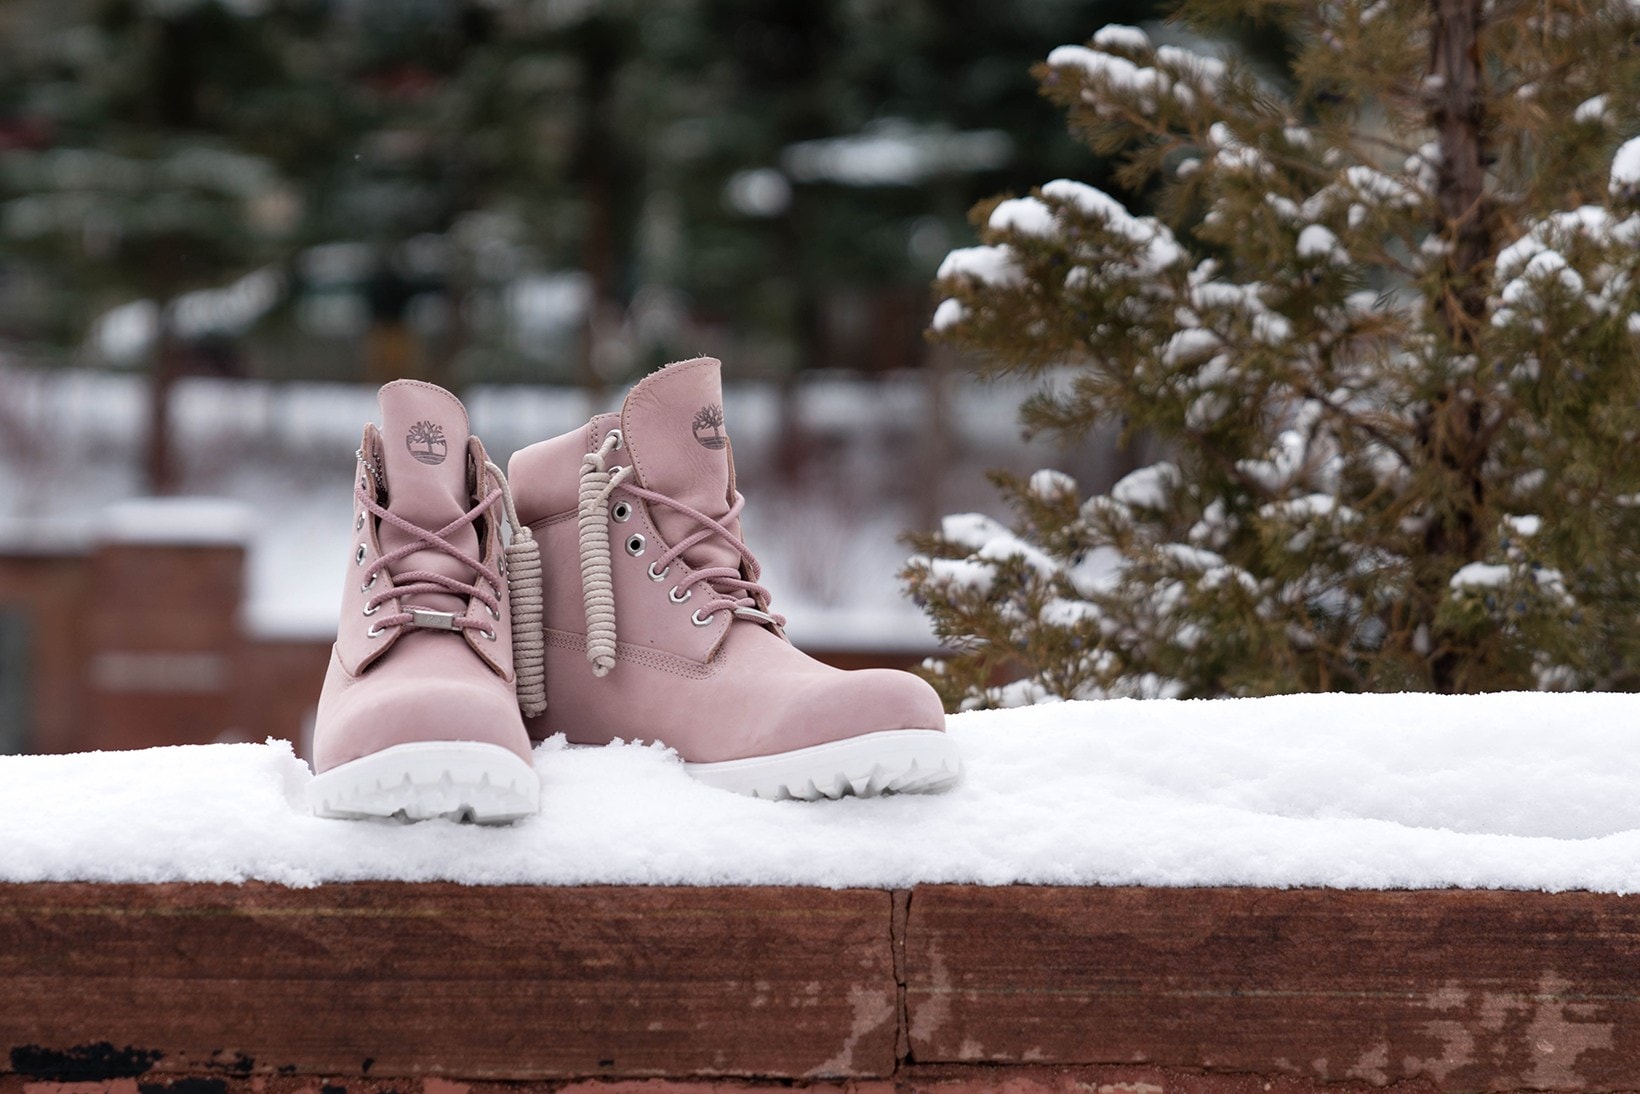 Ronnie Fieg x Timberland 6" Boot "Friends & Family" Edition